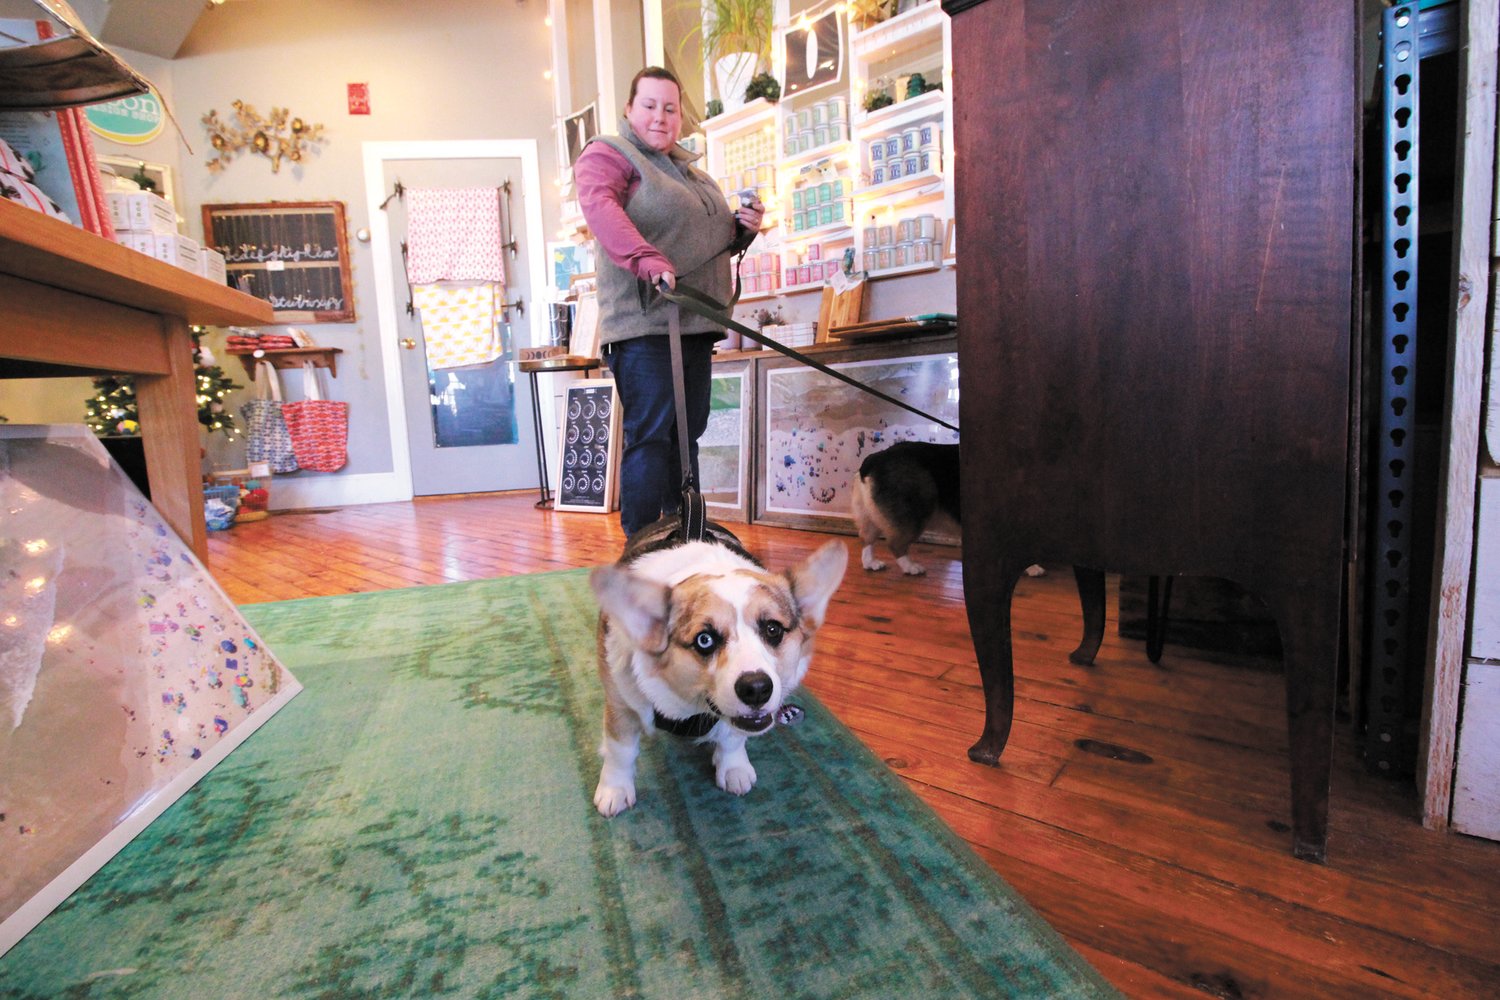 SHOPPING COMPANIONS: Corgis Oliver and Fig accompany their master Andrea Leonardo as she does her Christmas shopping at Noons on the Warwick side of the bridge in Pawtuxet. (Warwick Beacon photos)